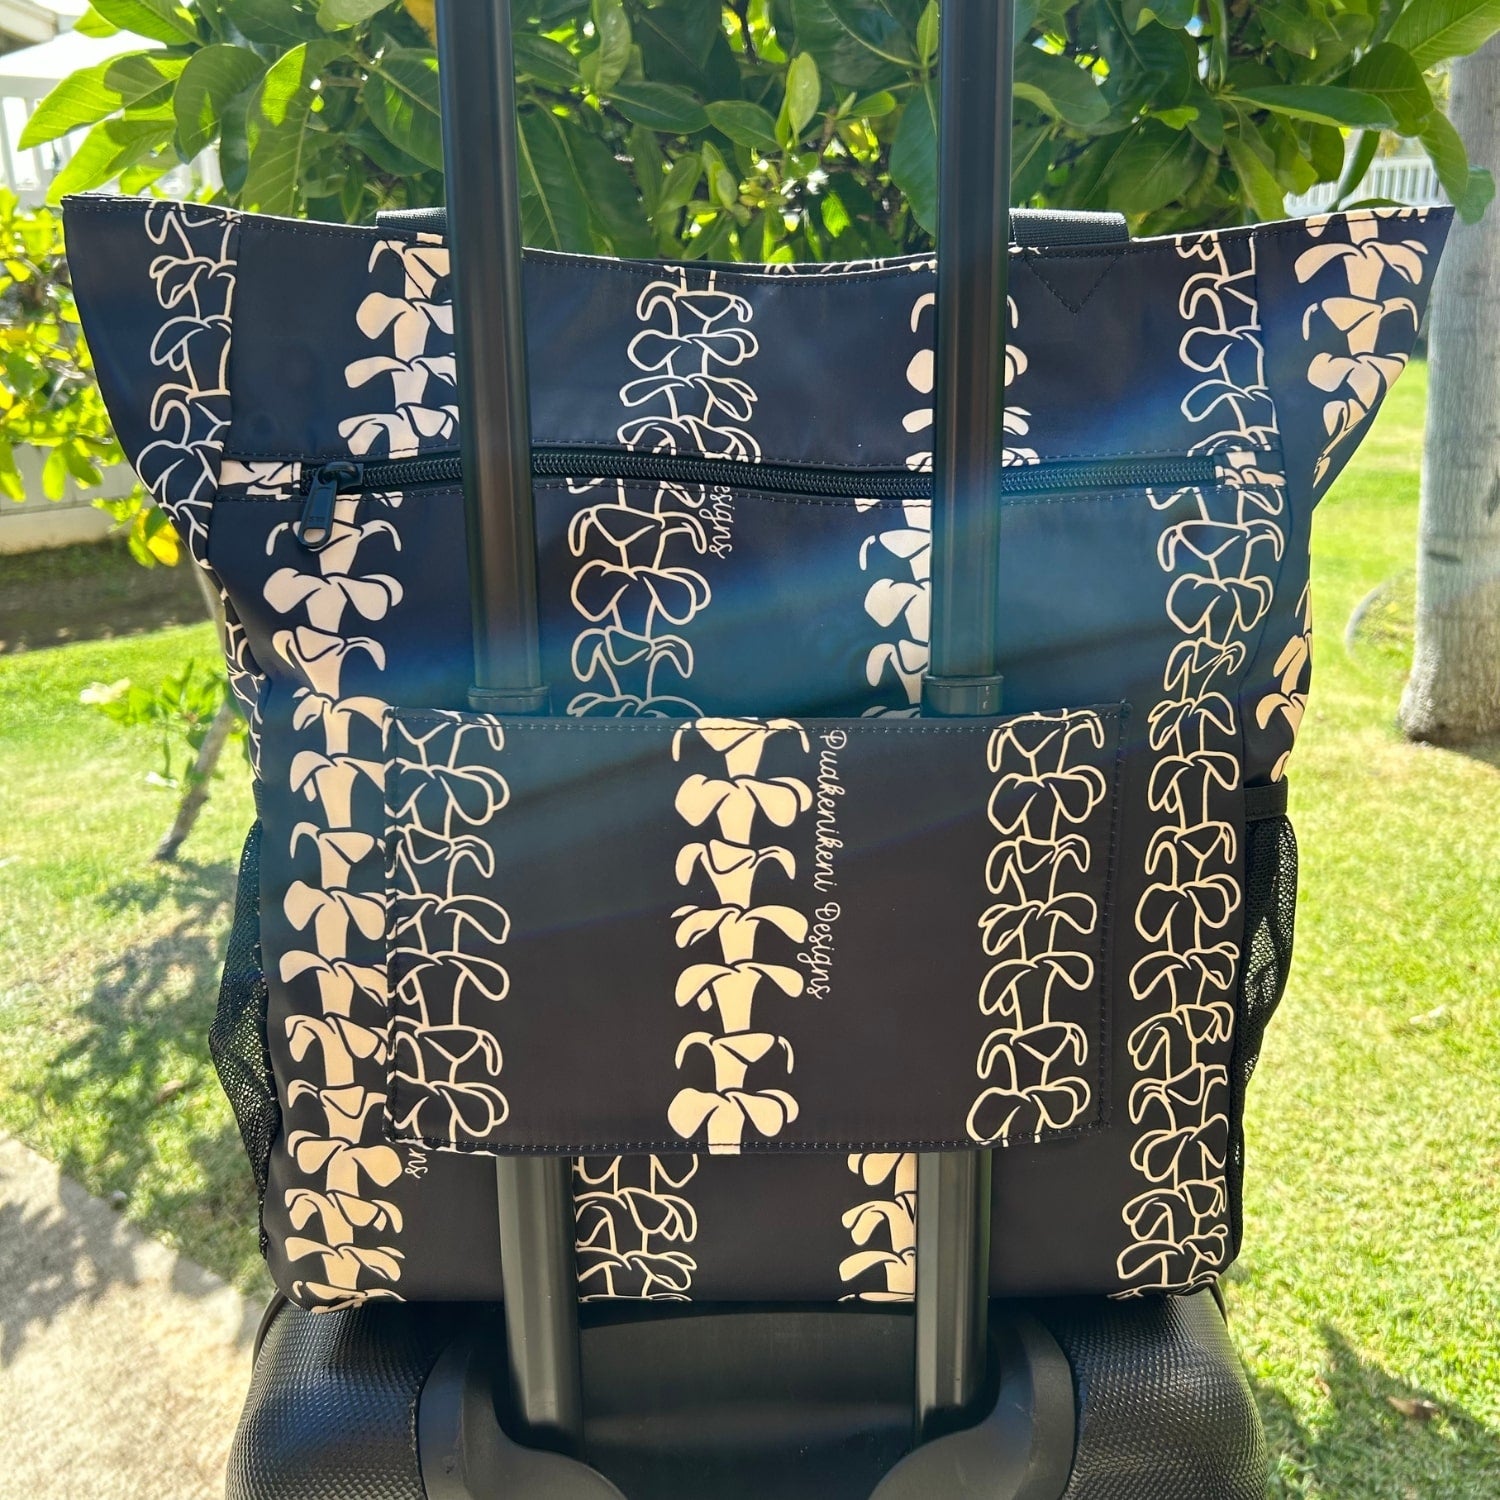 Holoholo Bag for travel from Puakenikeni Designs - use for beach, diaper bag, handbag, hula bag on a rolling suitcase back view